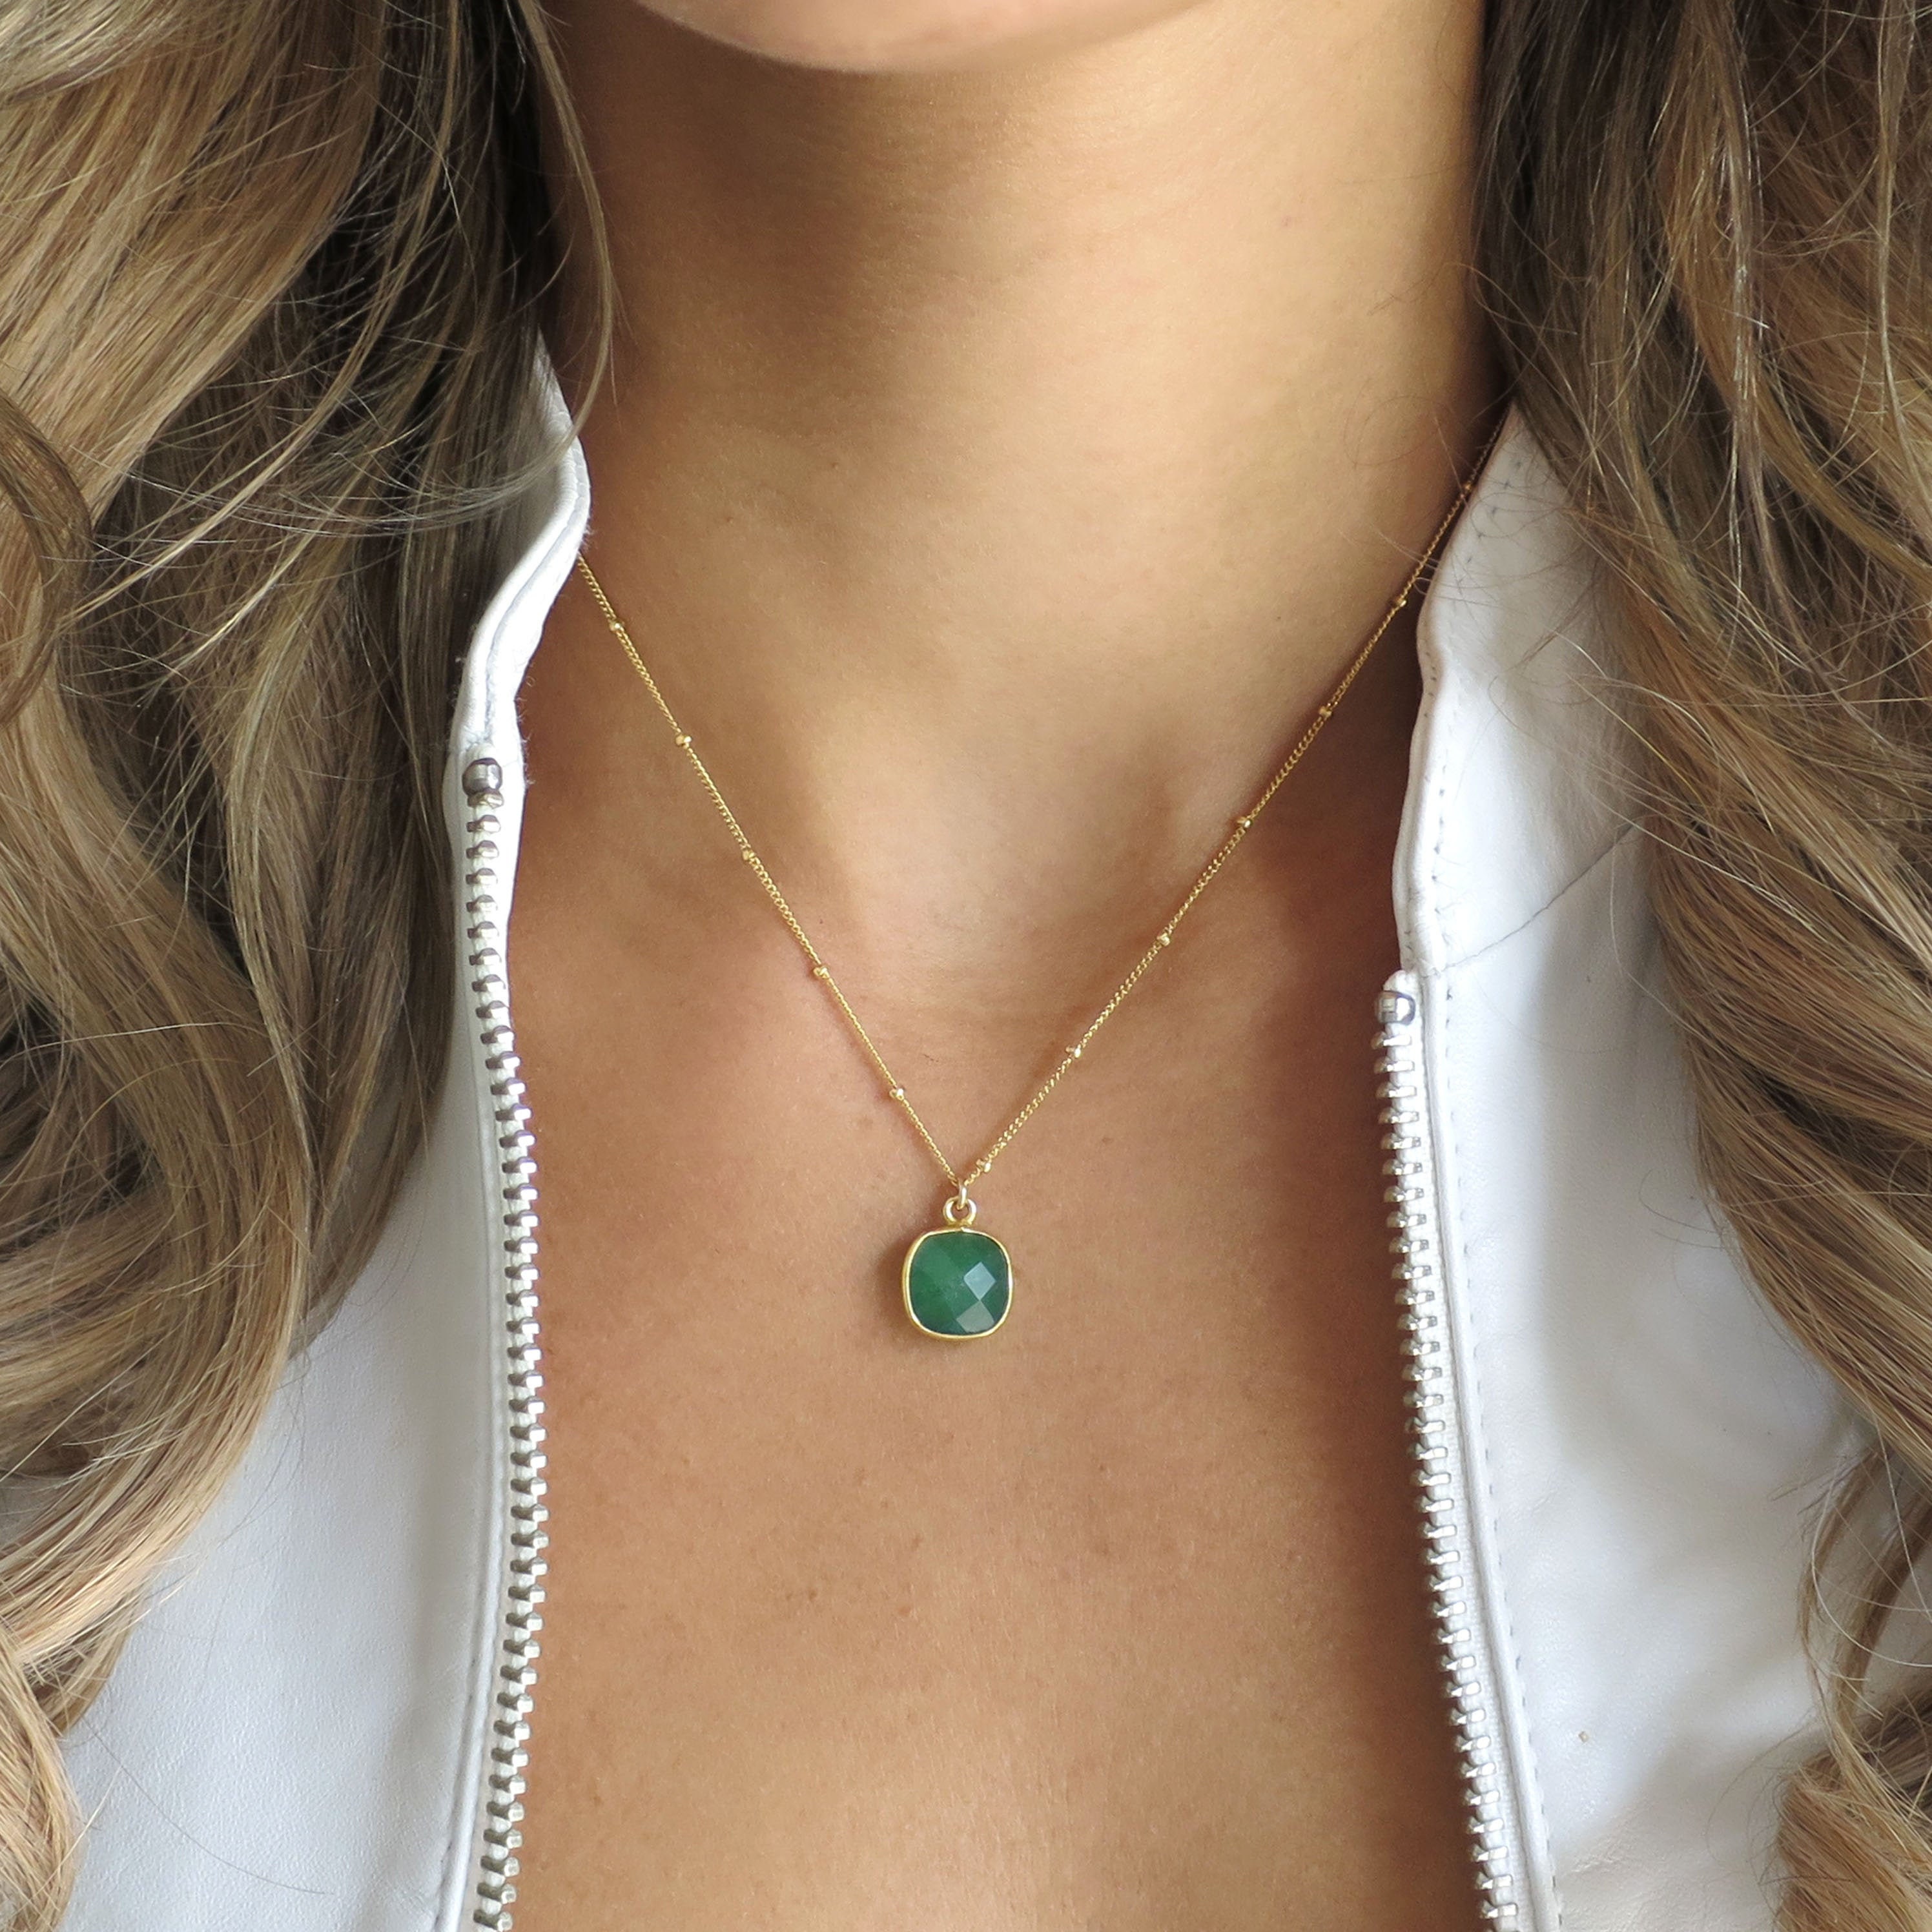 18KT Gold Emerald Stone Necklace - Elegant and Luxurious